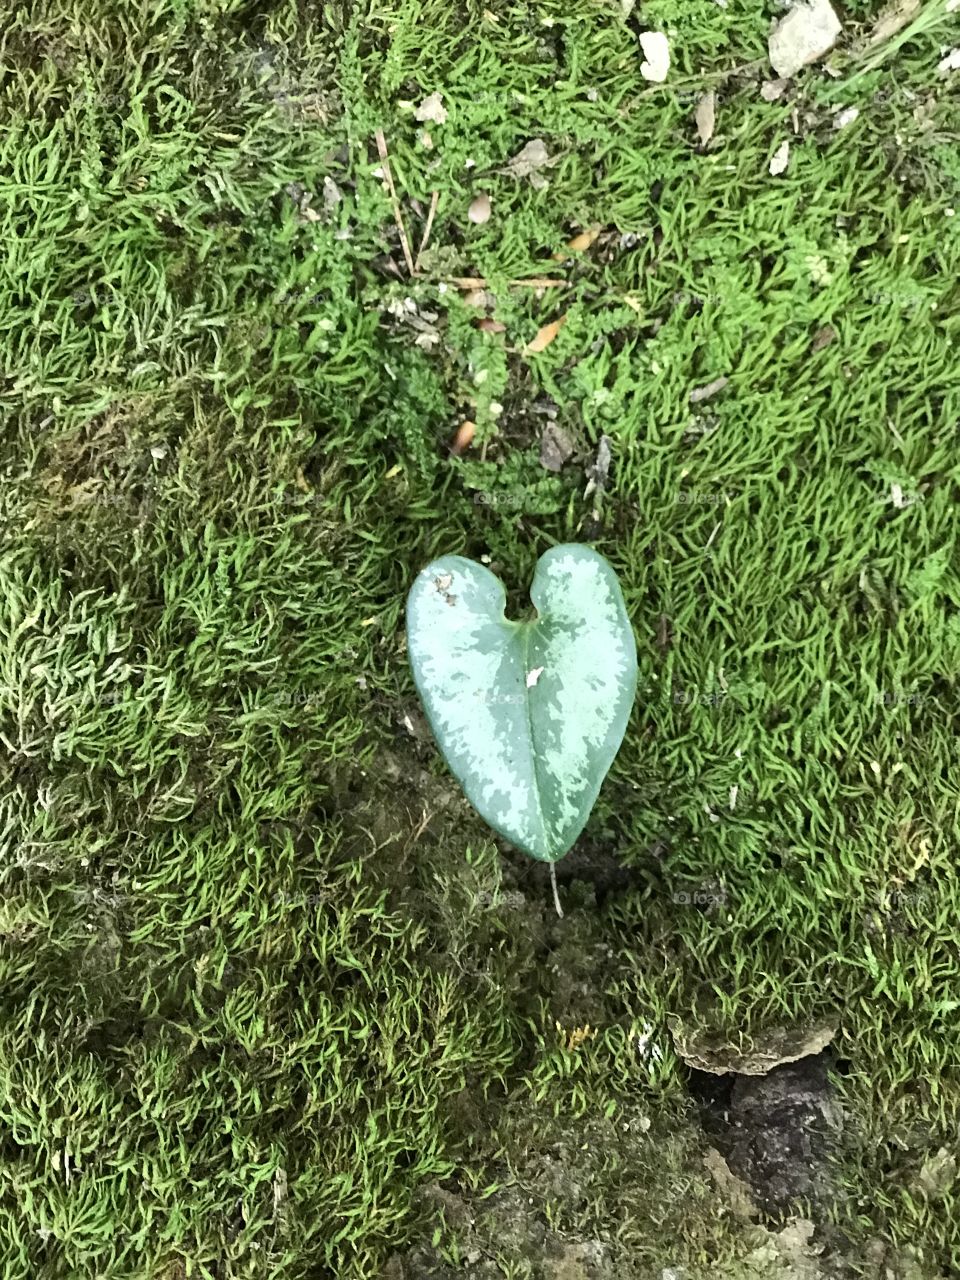 Forest Heart